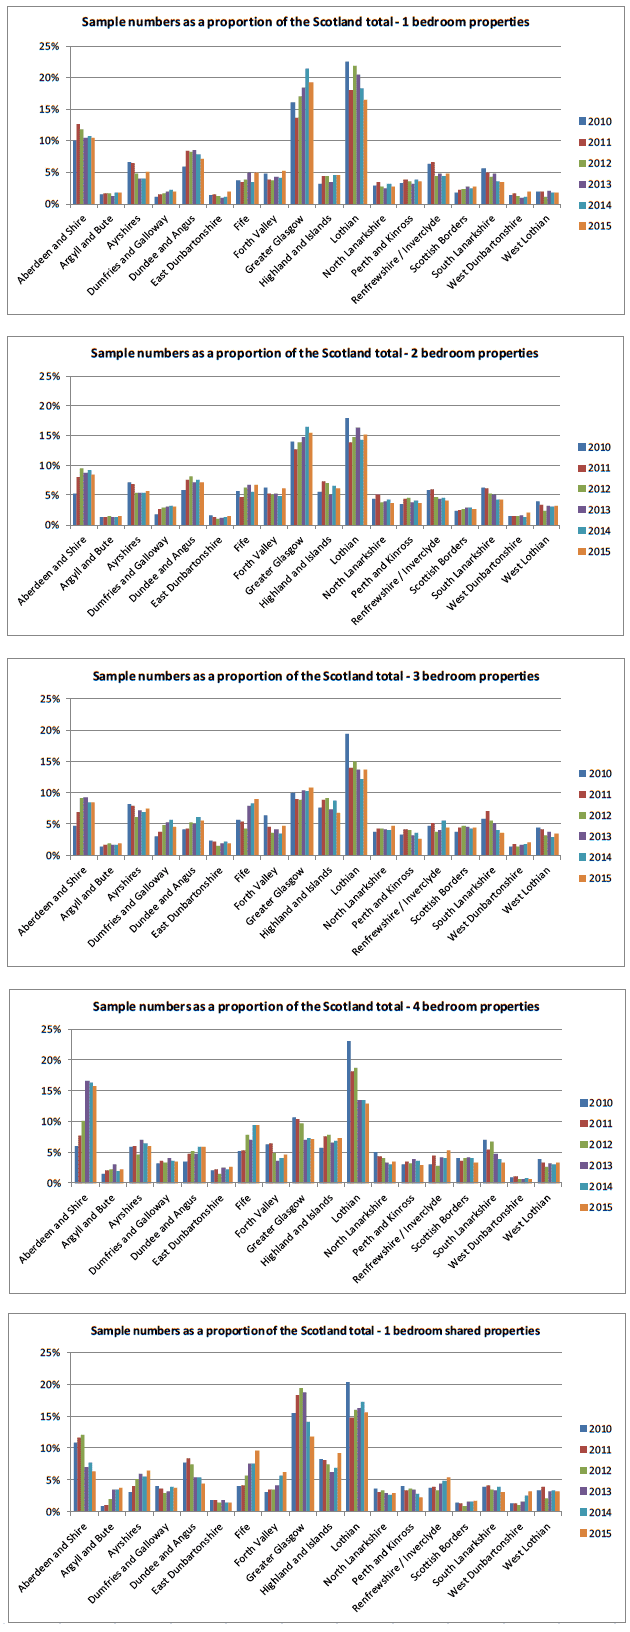 CHART C3 - Sample Numbers in Broad Rental Market Areas, as proportions of the Scotland